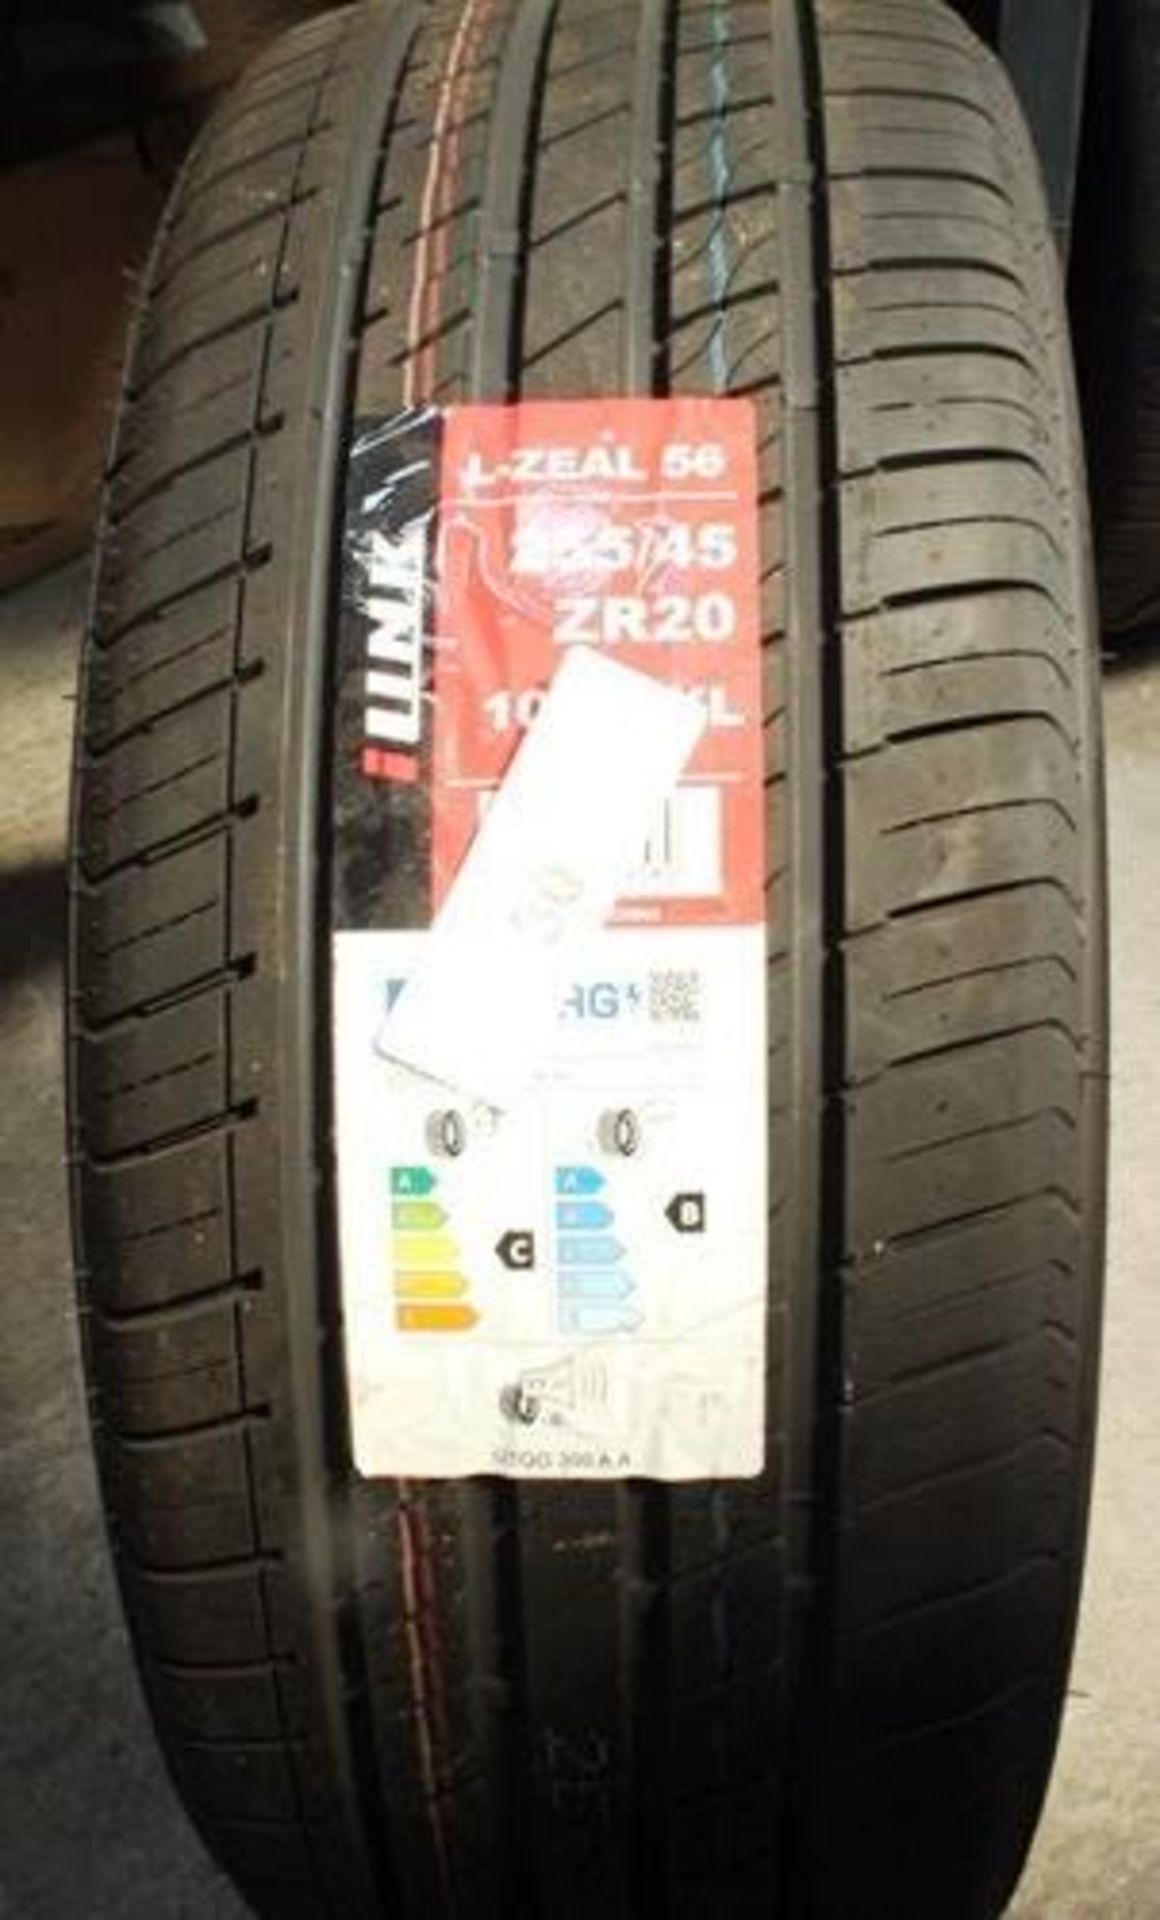 1 x iLink L-Zeal 56 tyre, size 255/45ZR20 105W XL - New with labels (GS1)